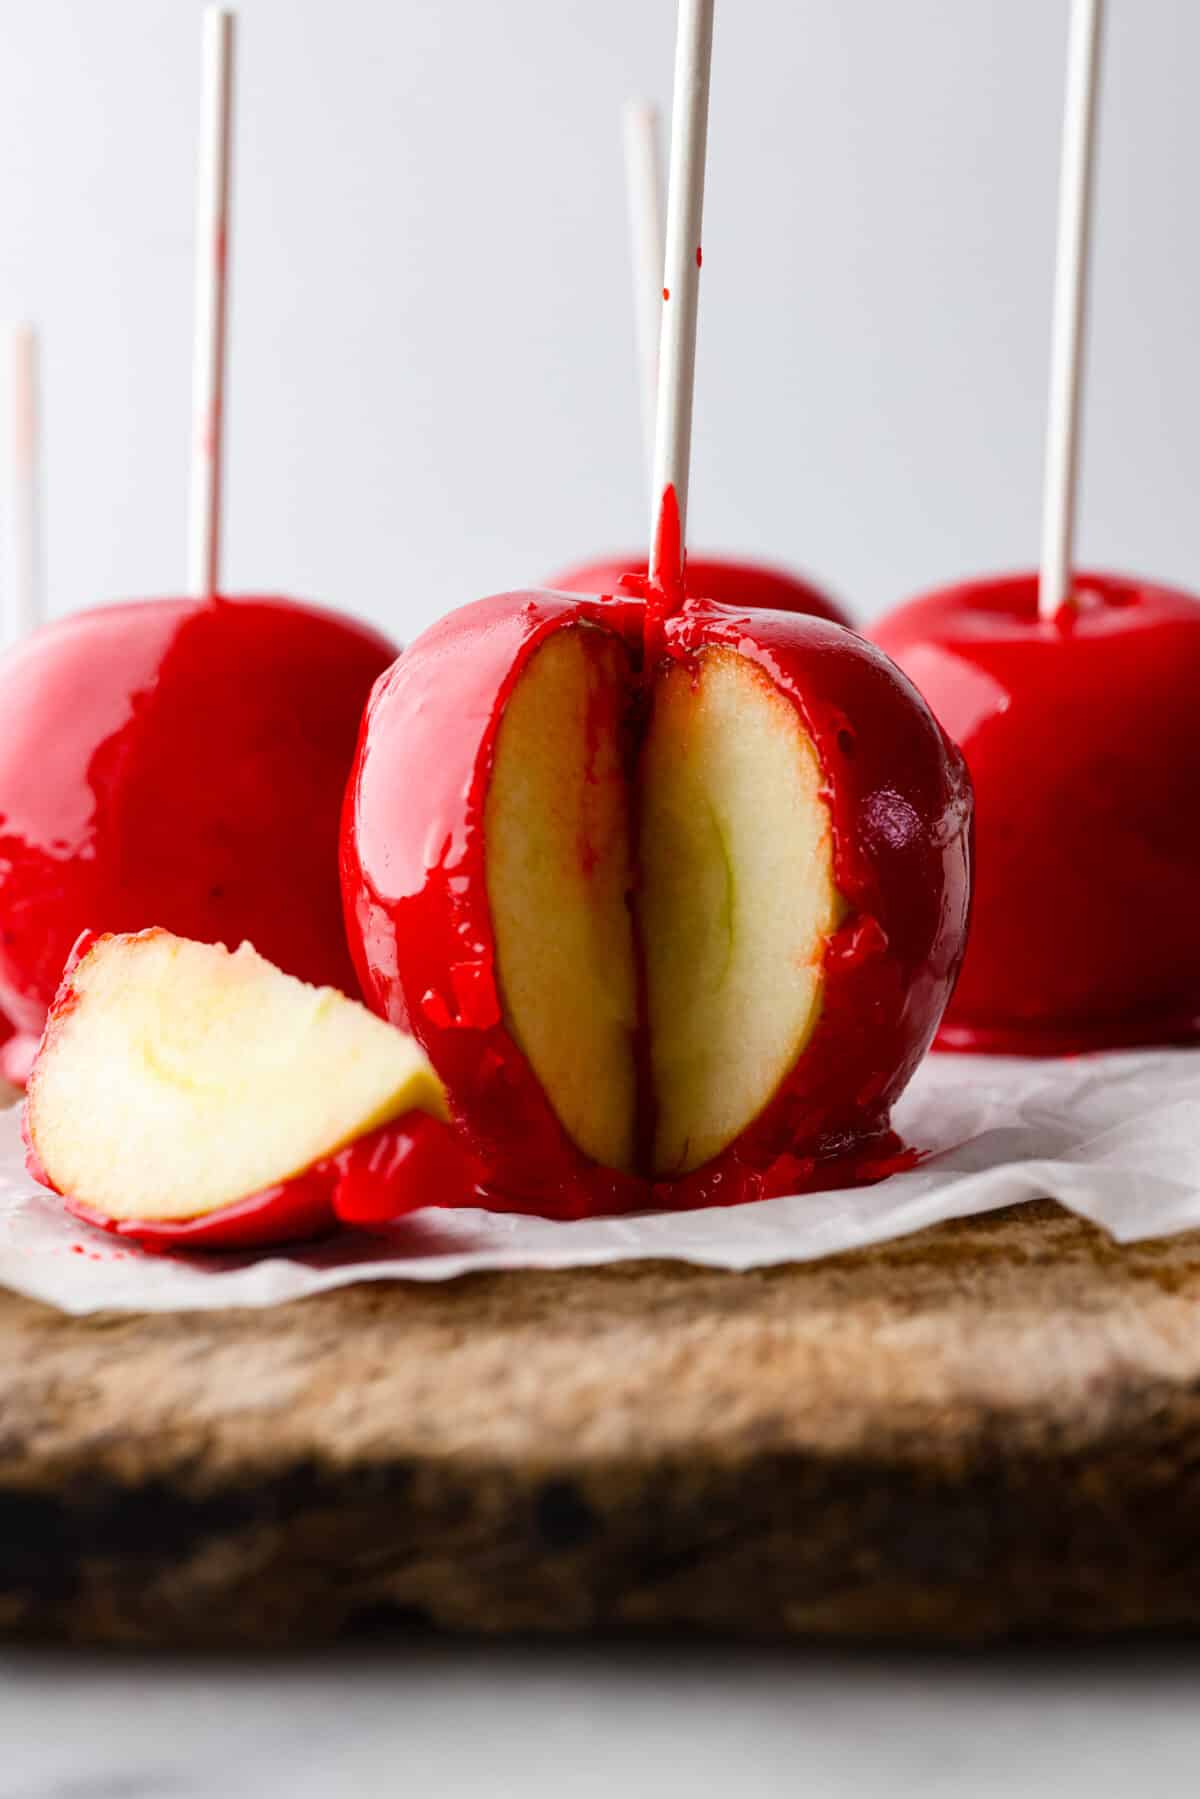 Hero image of candied apples, one has a piece cut out of it.